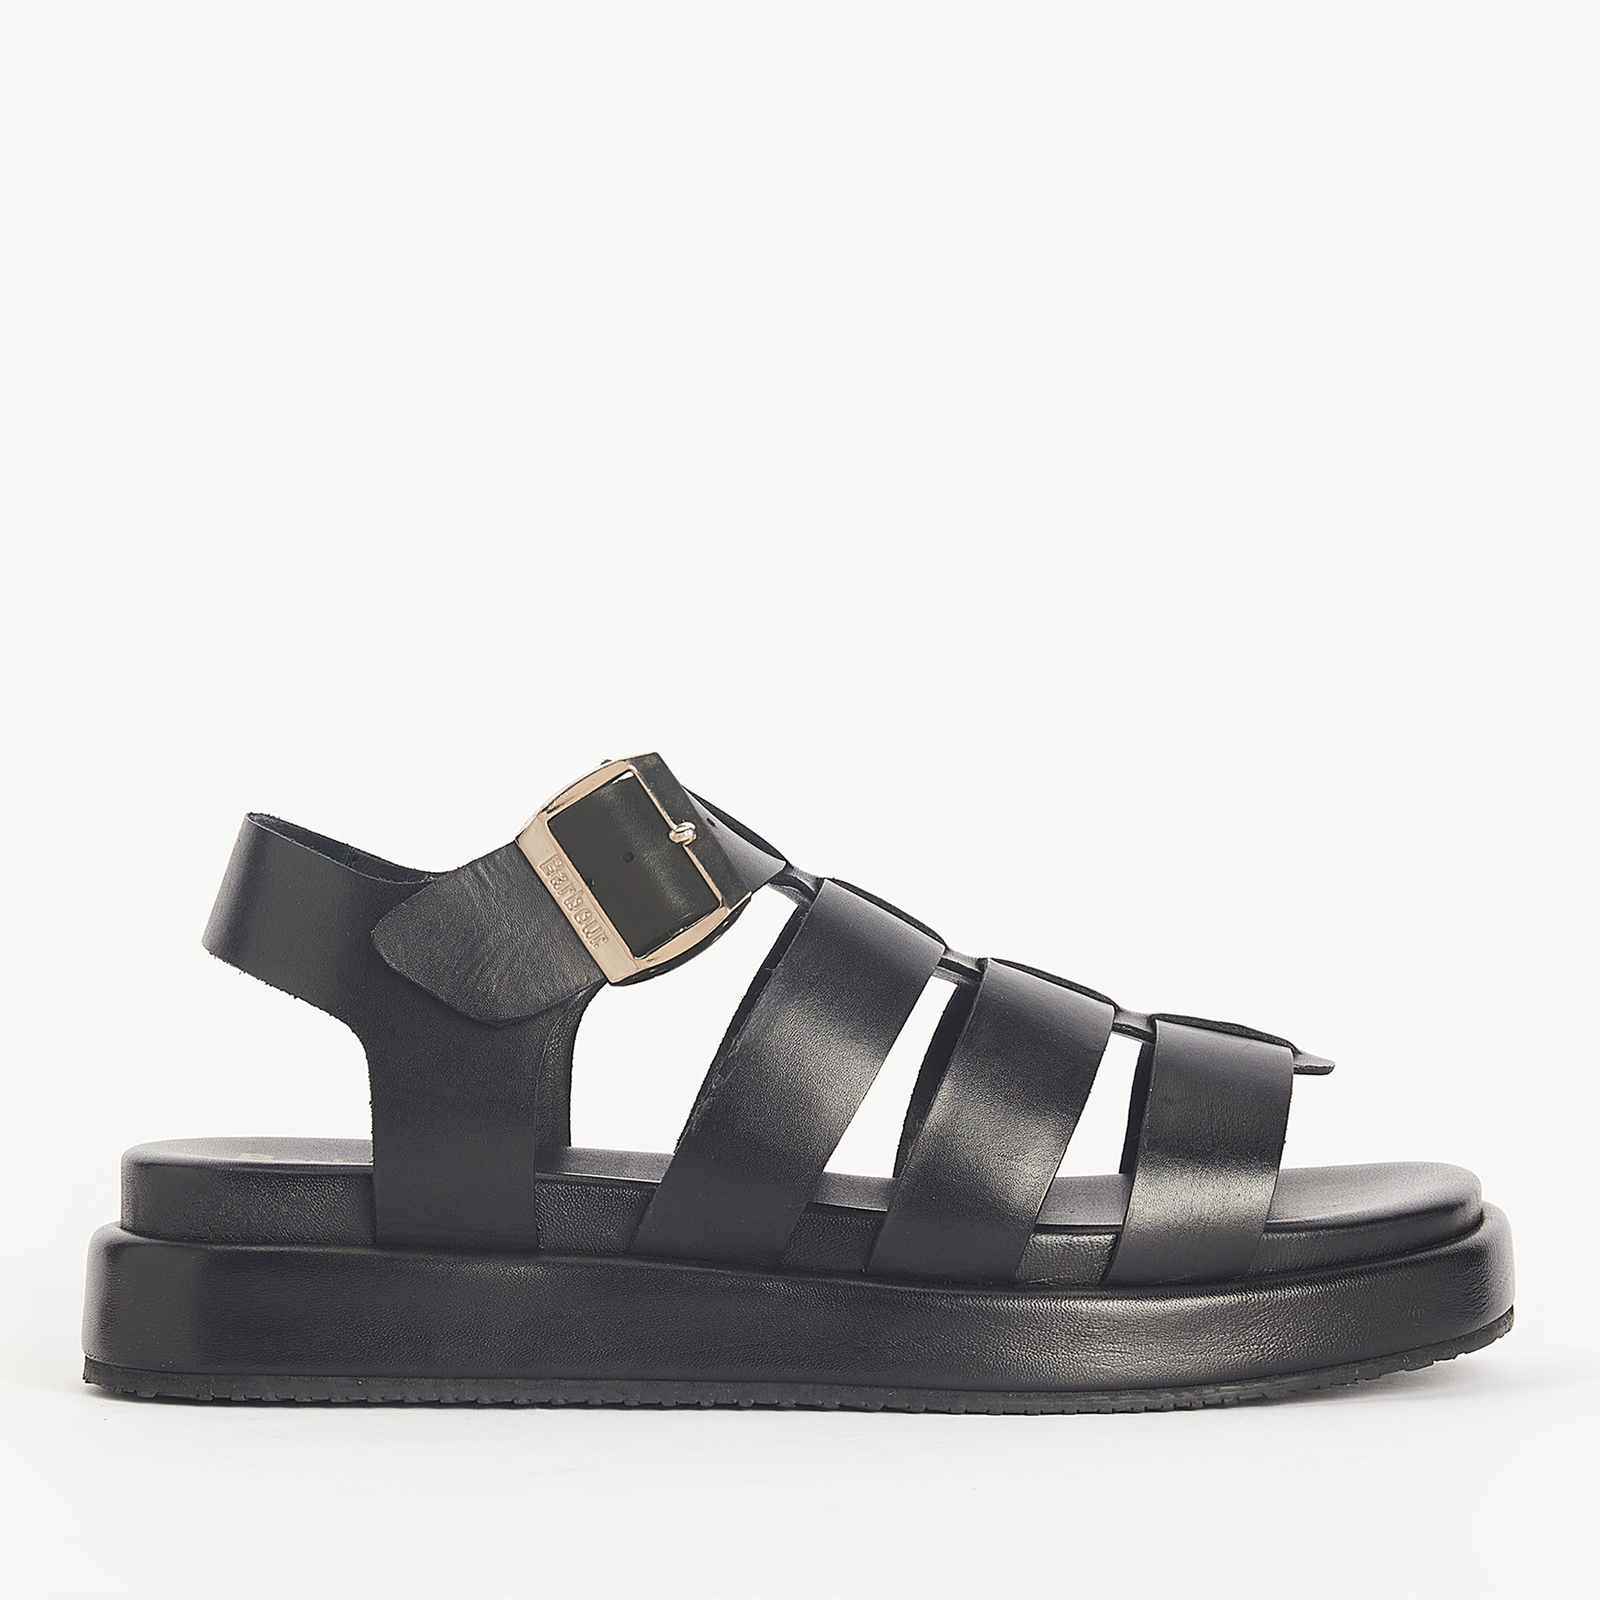 Barbour Women’s Charlene Leather Sandals